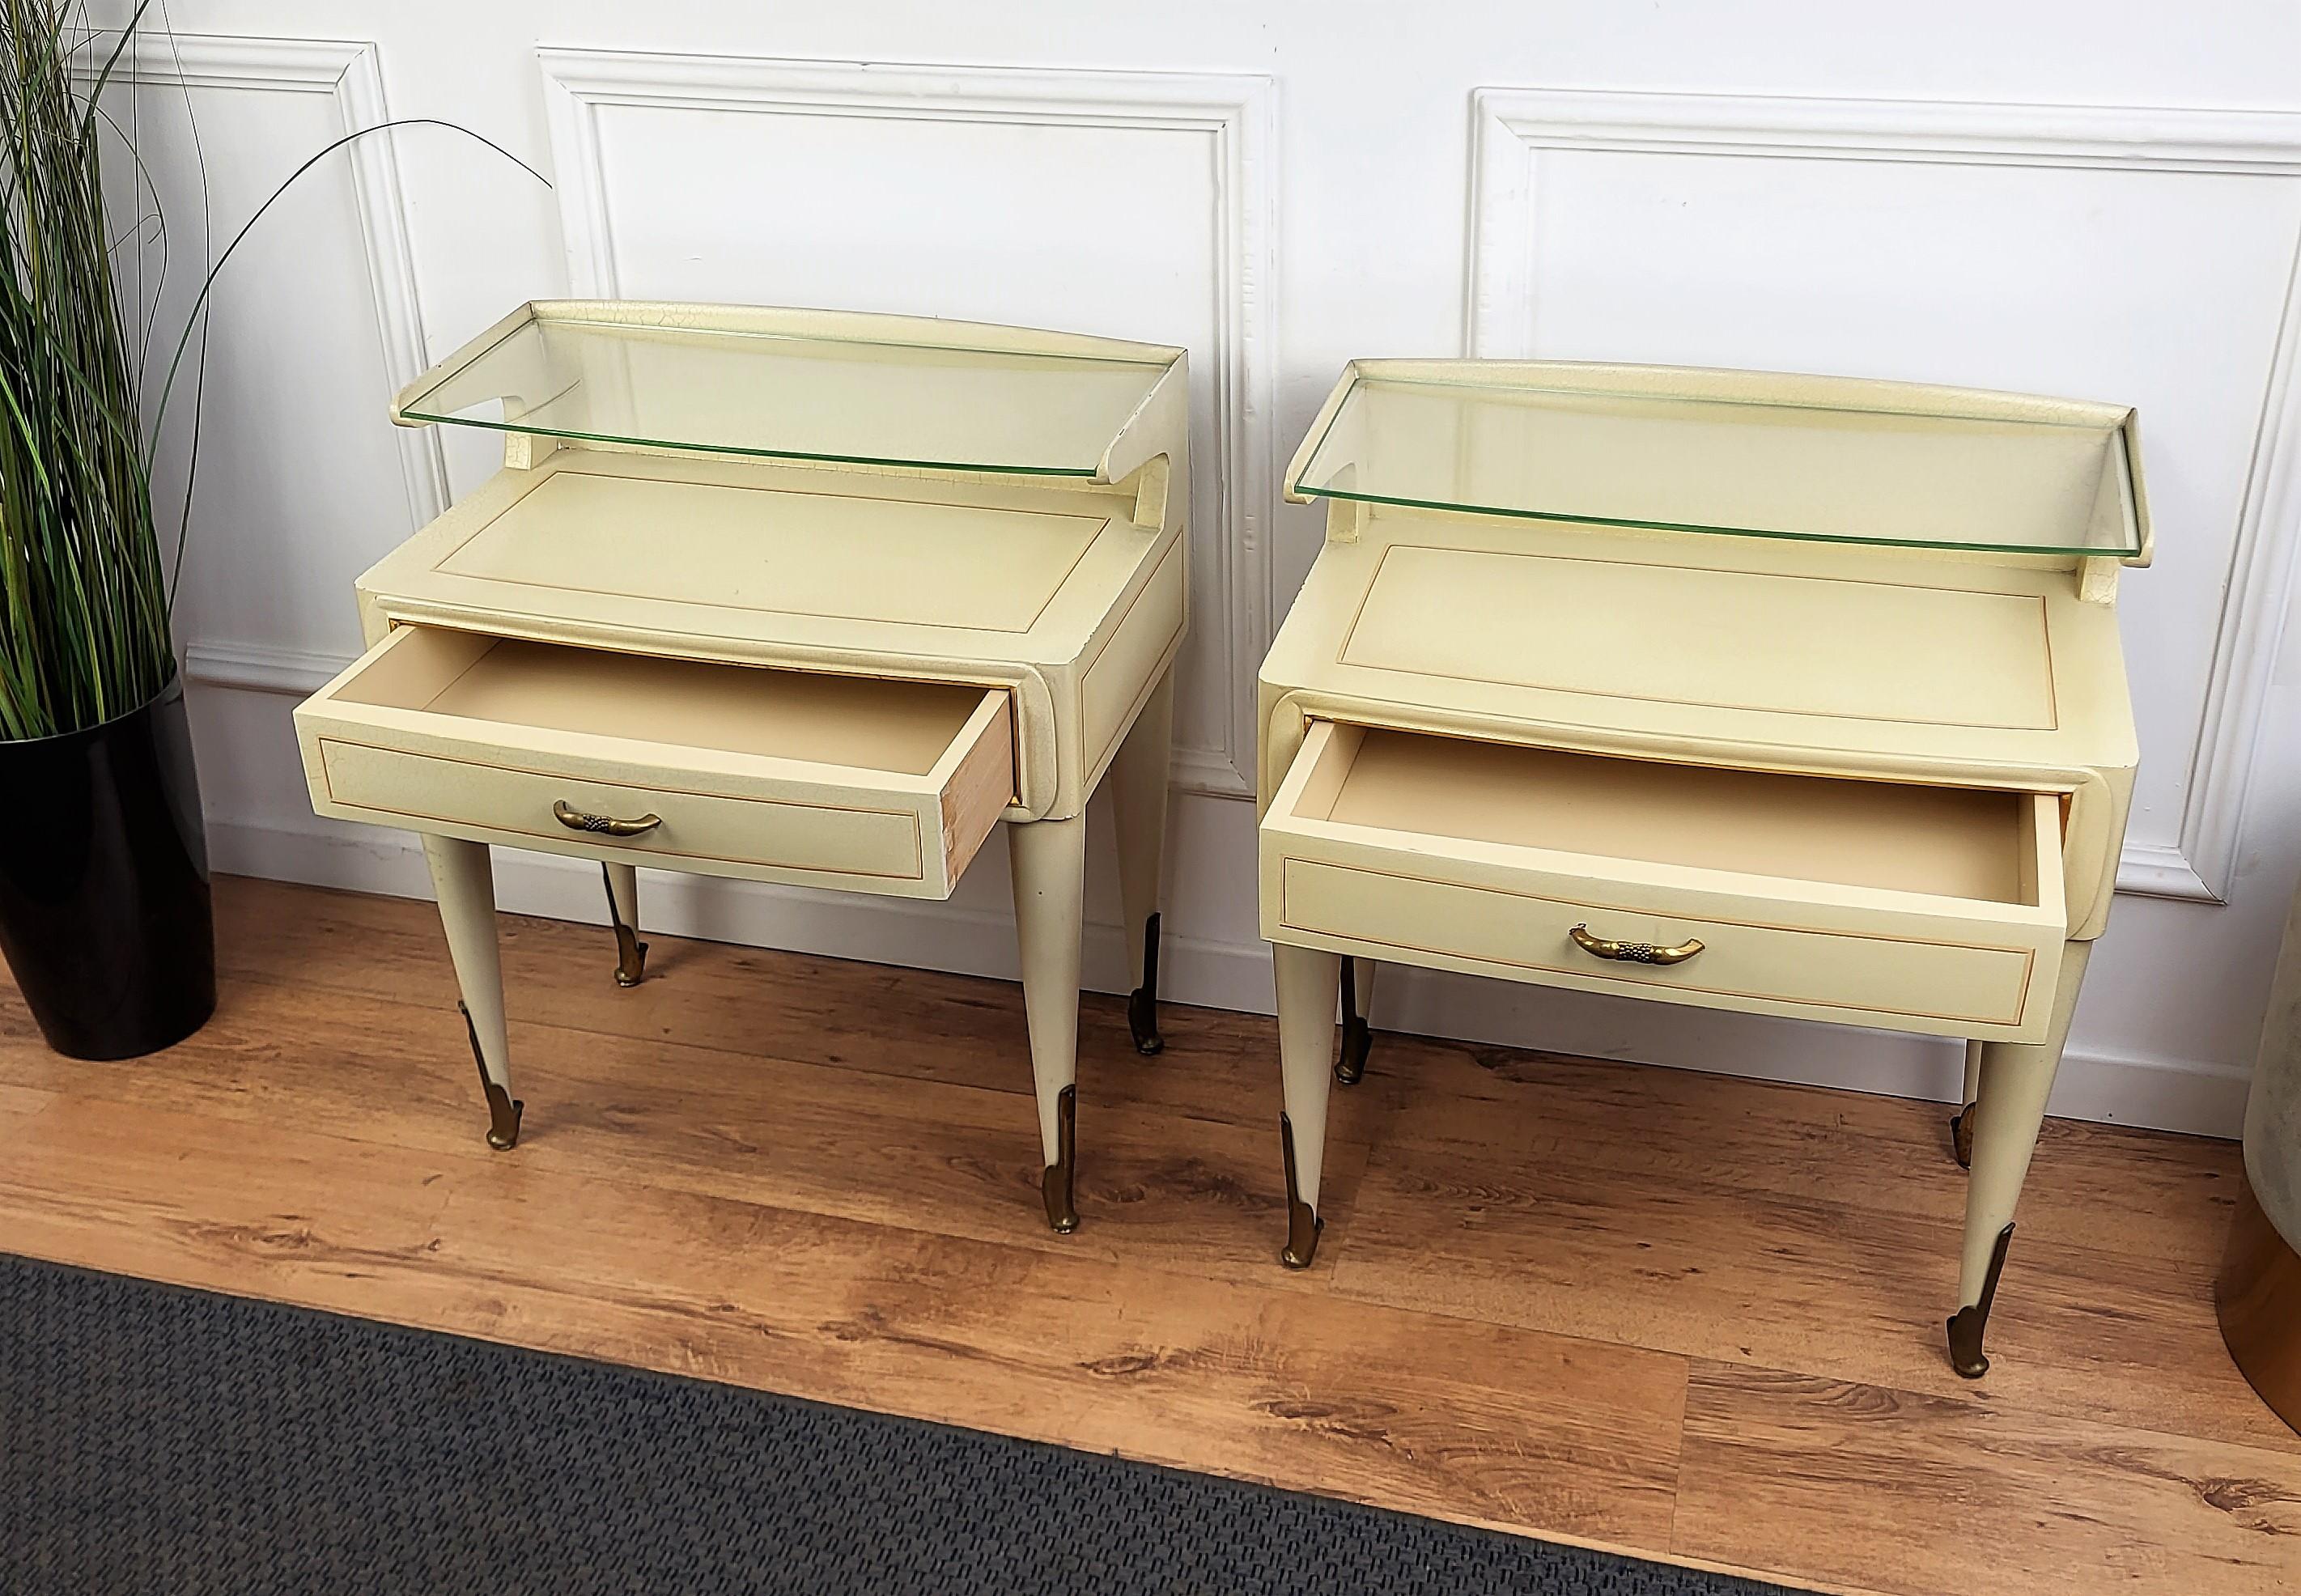 Italian Midcentury Art Deco Night Stands Bed Side Tables White Wood Brass Glass In Good Condition For Sale In Carimate, Como